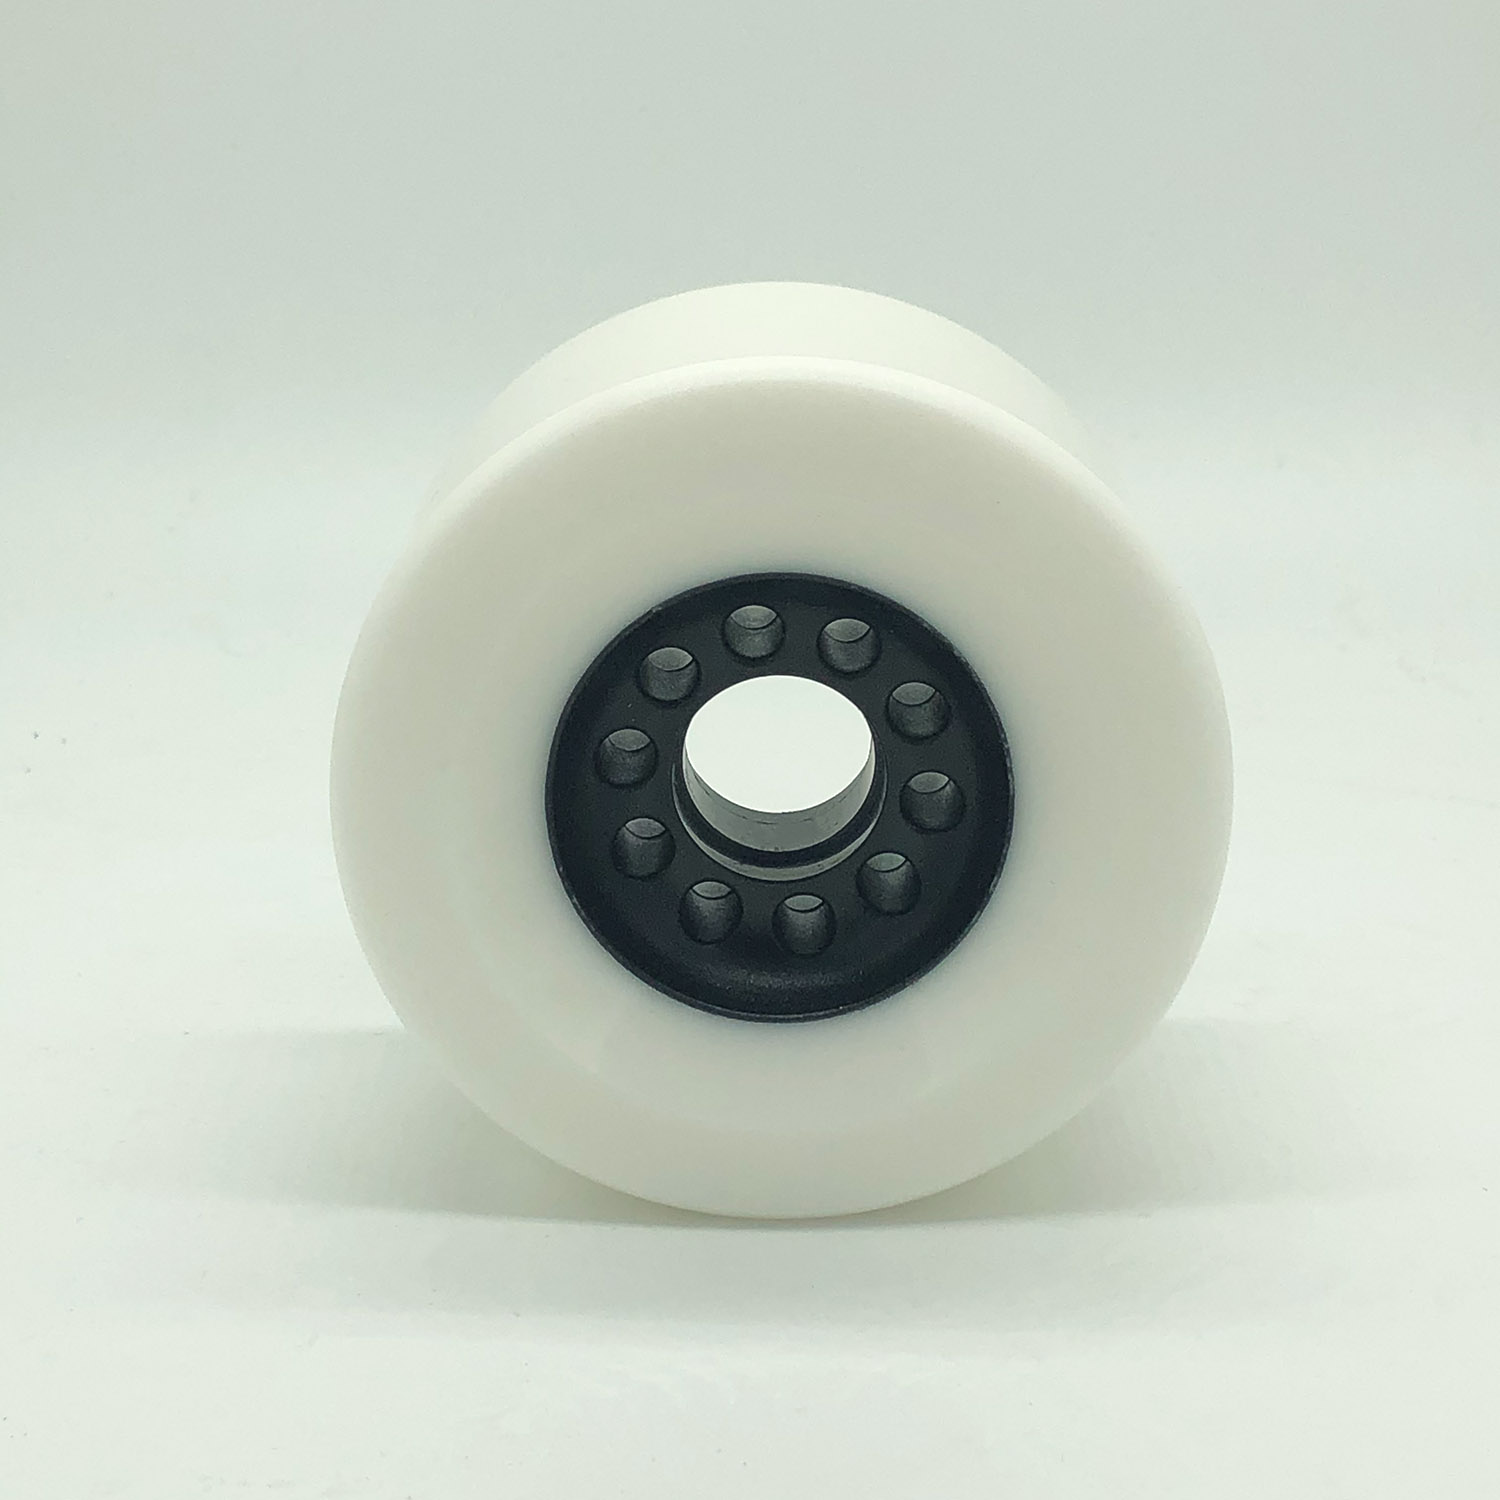 Boa Hatchling White 90mm Longboard Wheels for Electric or LDP